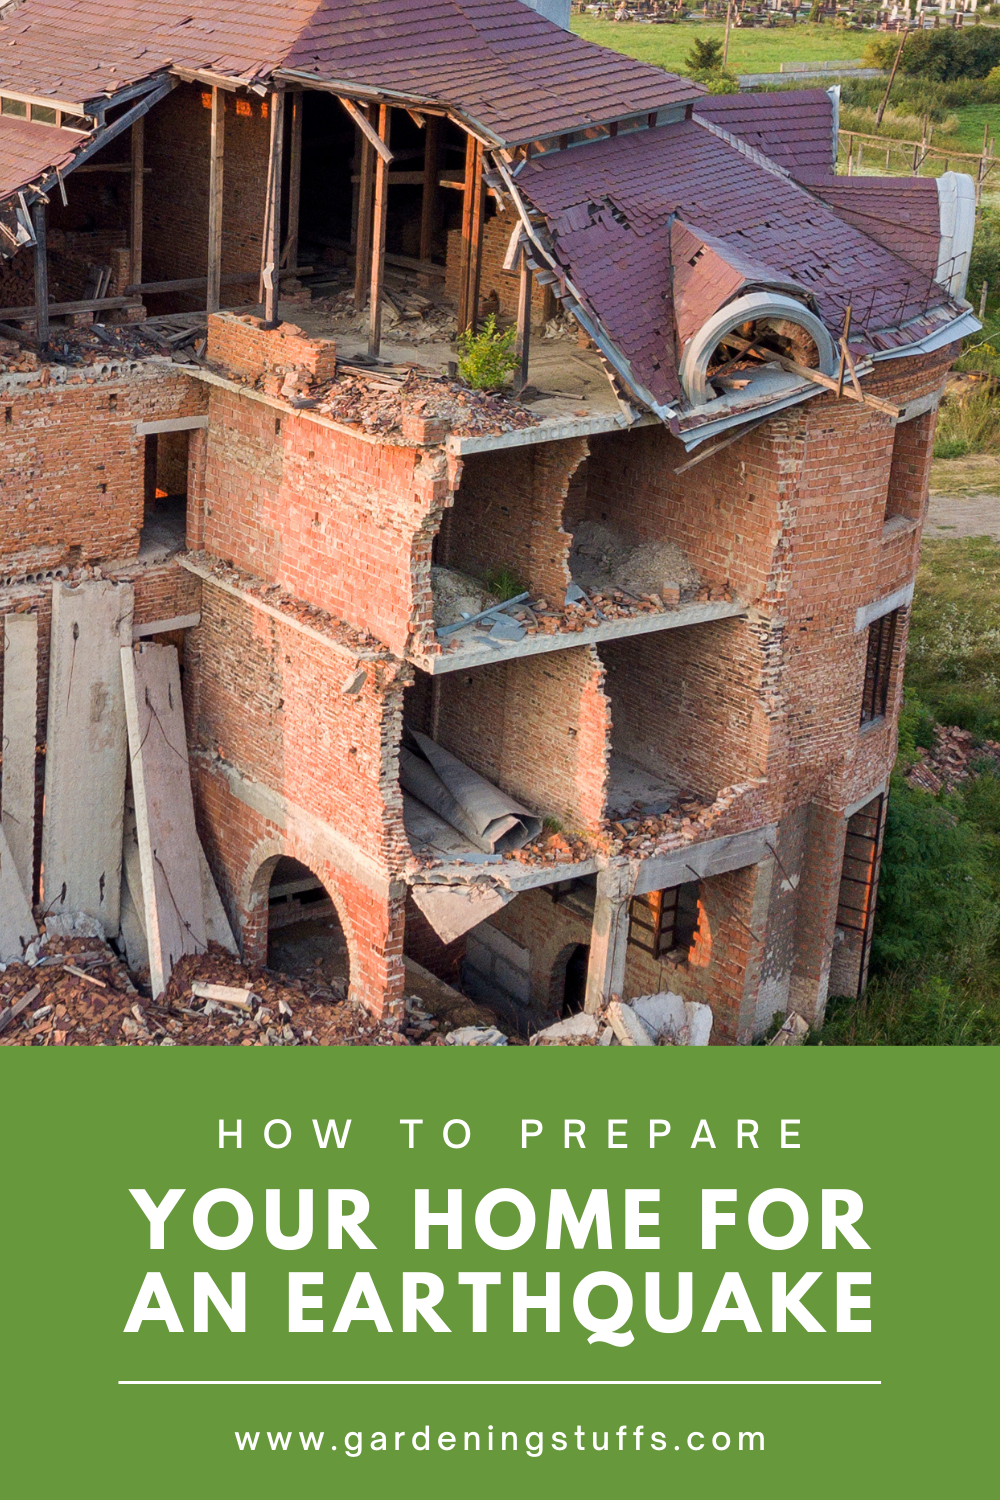 While most earthquakes are small and harmless, it is always best to prepare for disaster ahead. Prepare your home for an earthquake disaster with this guide and protect yourself and your kids from potential hazards and injuries.